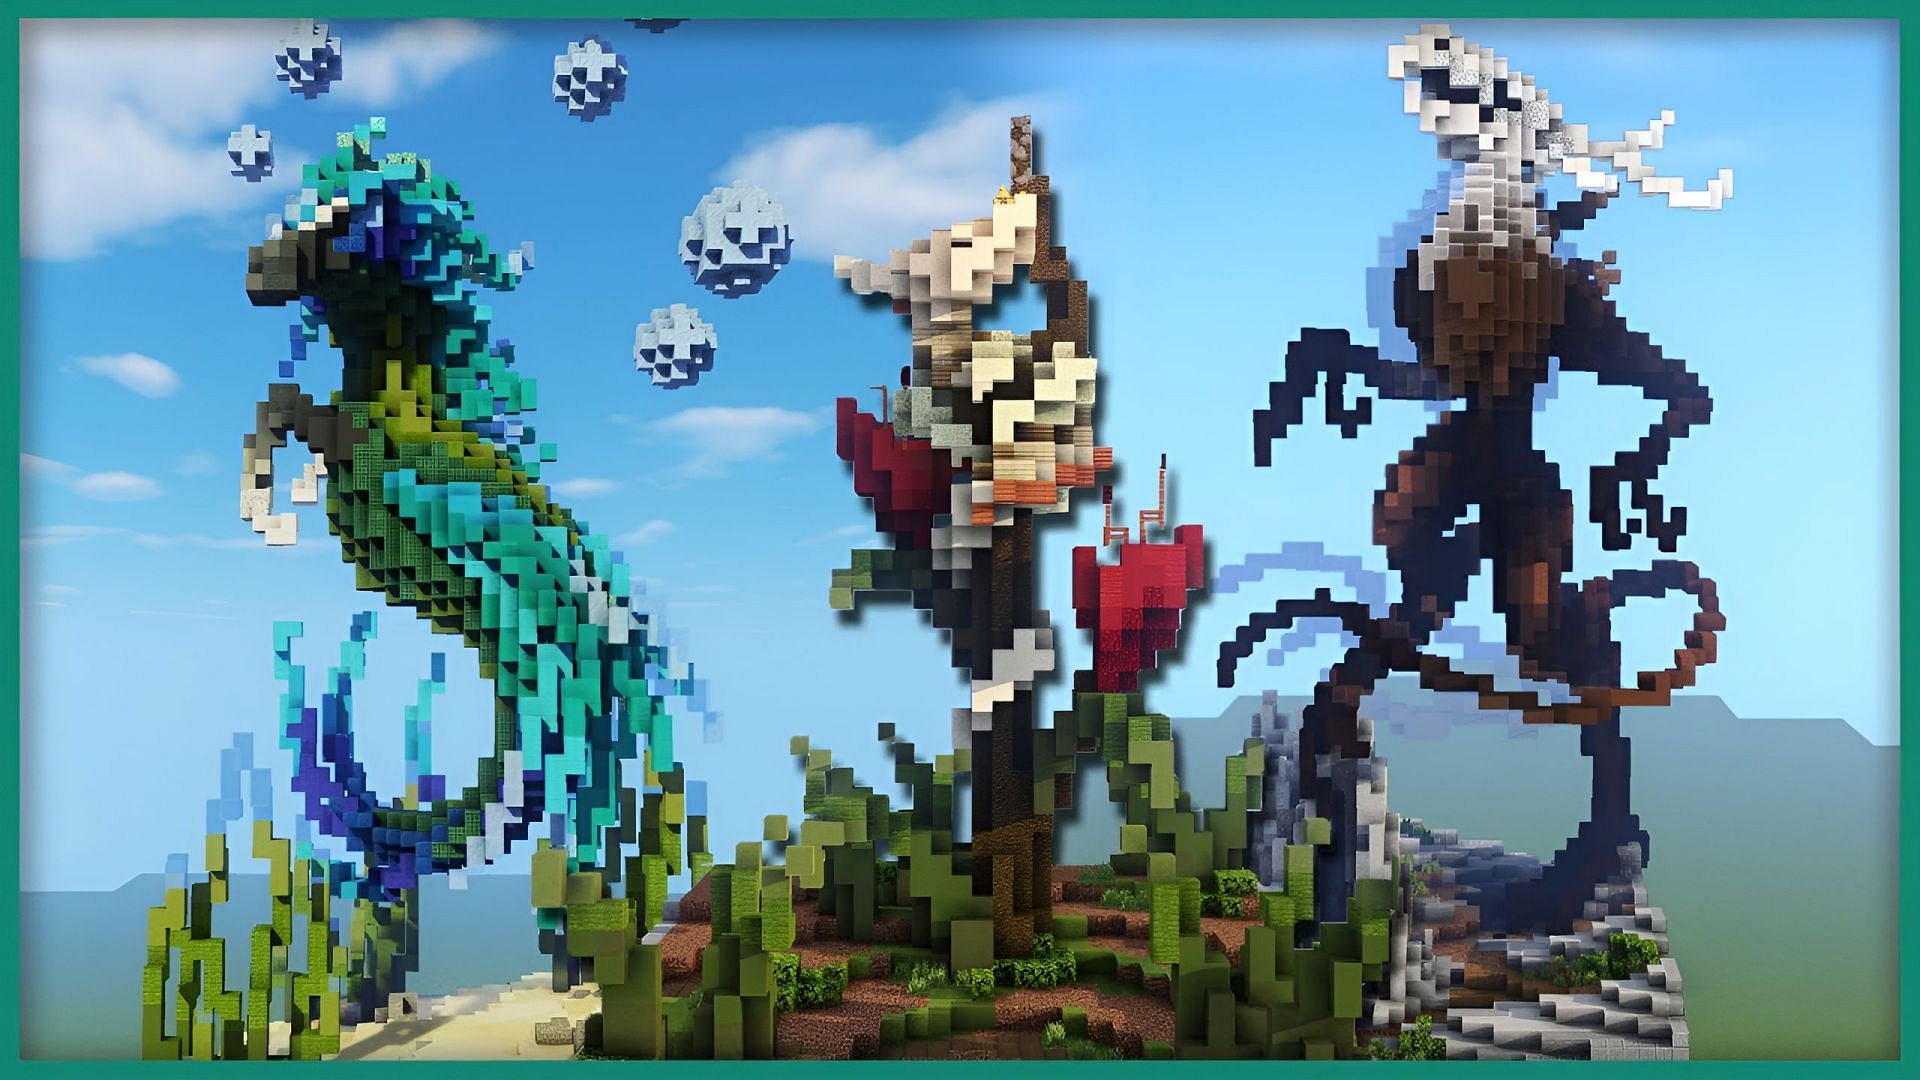 Statues make for amazing builds in Minecraft (Image via Youtube/PearlescentMoon)